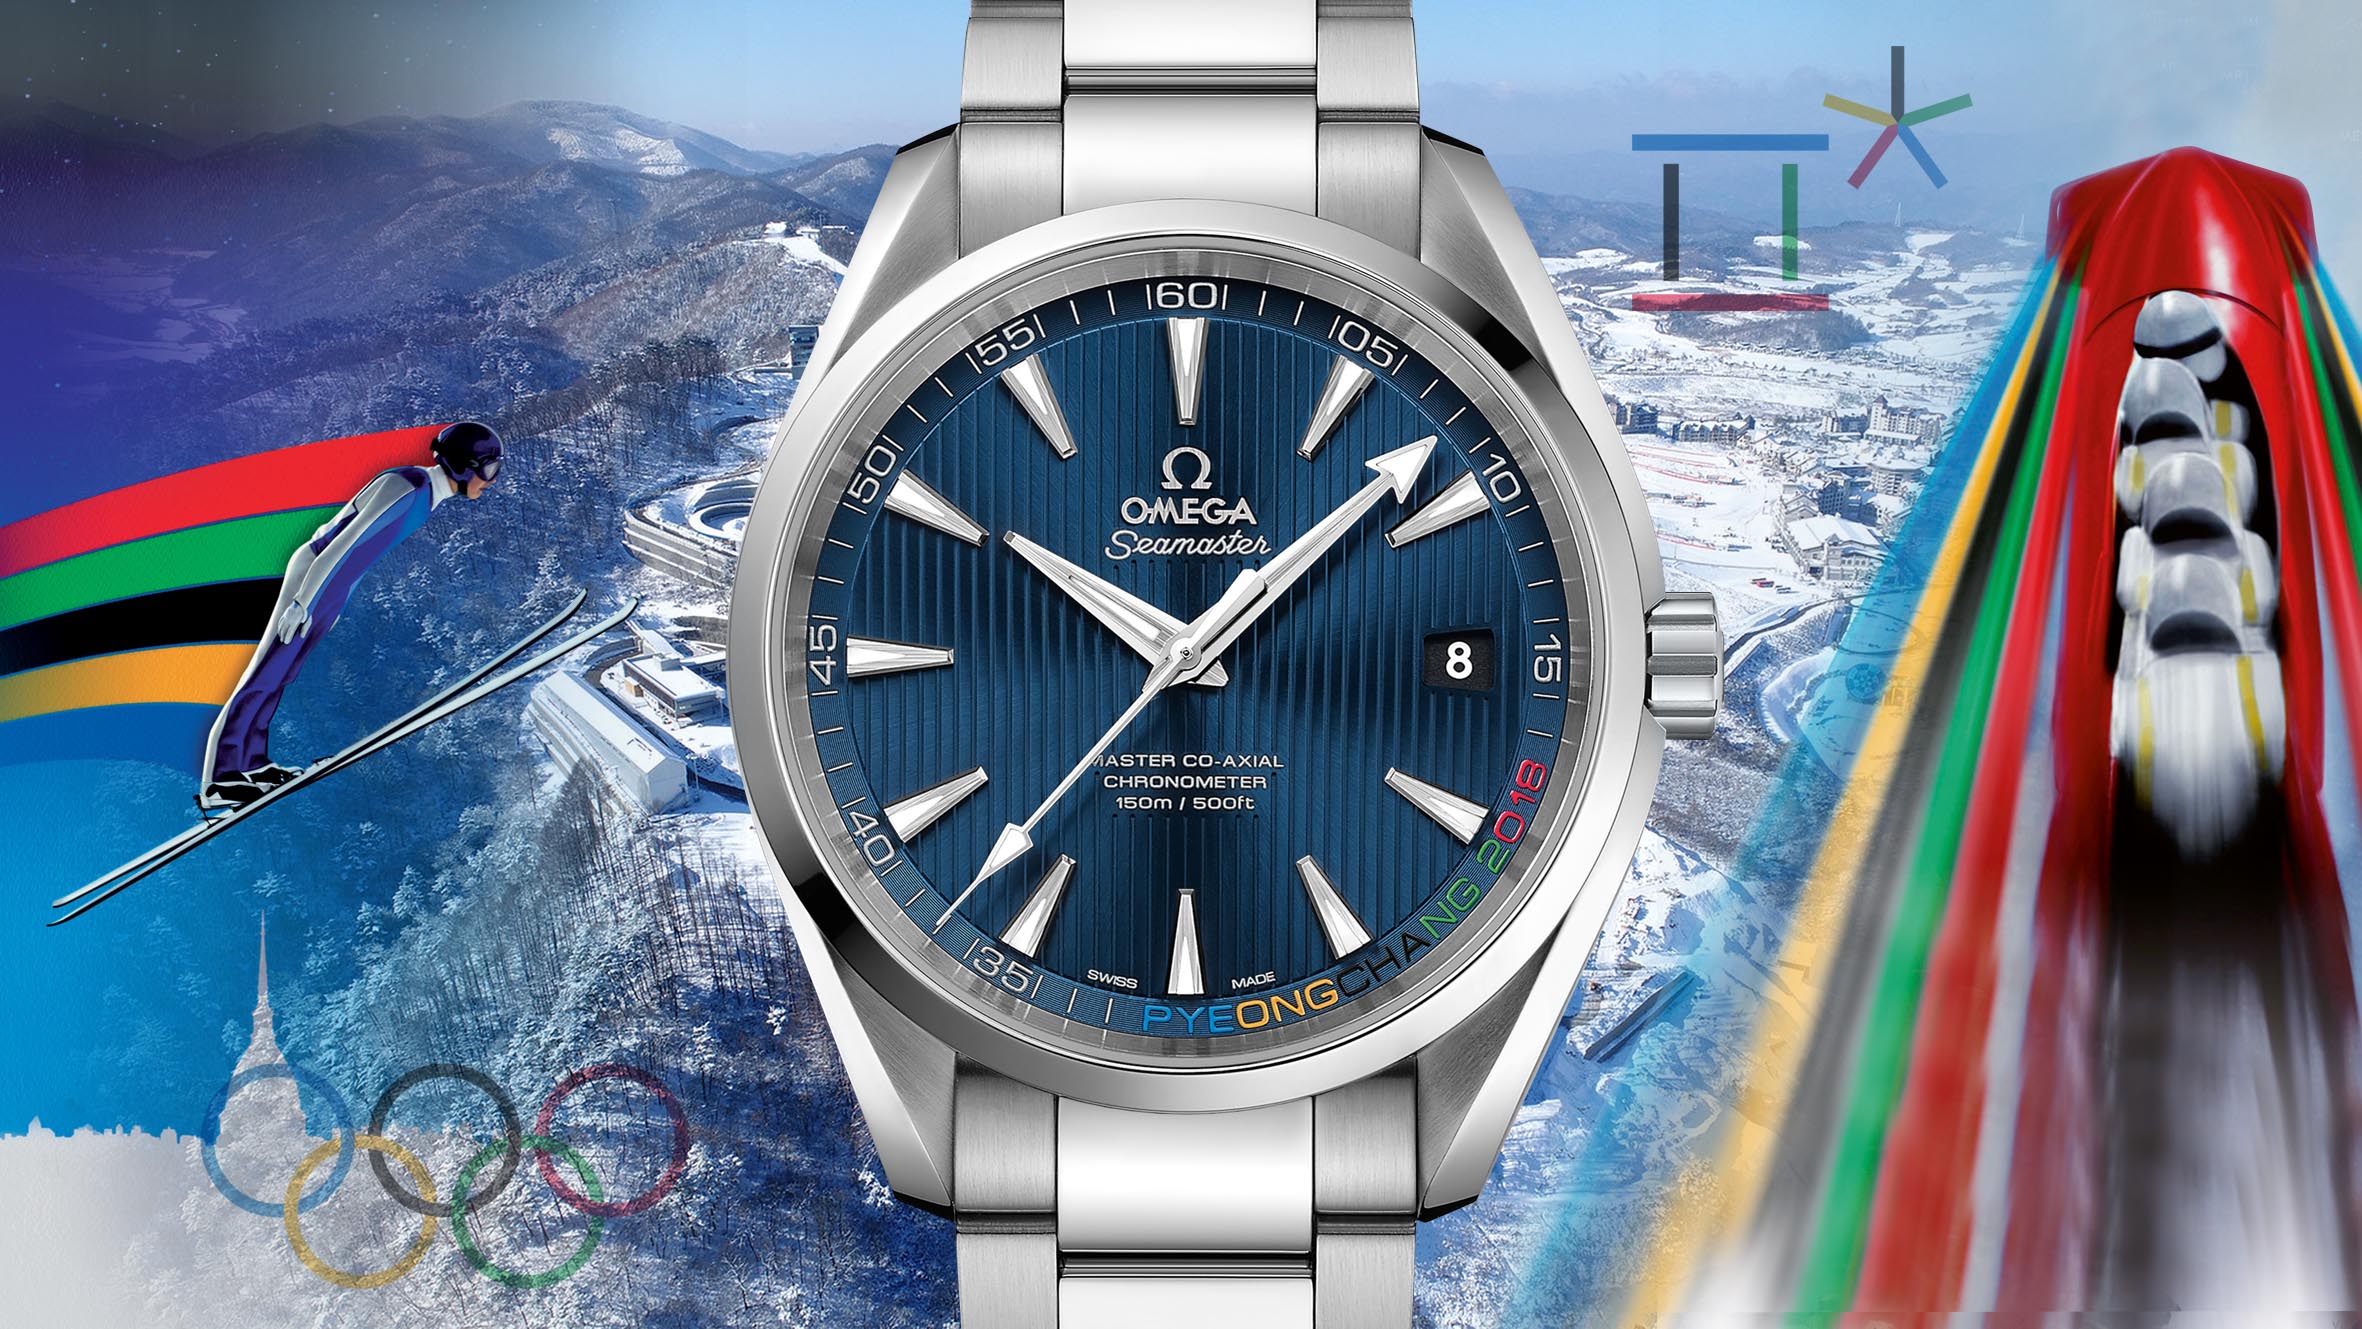 Omega And Their High-Precision Olympic Legacy